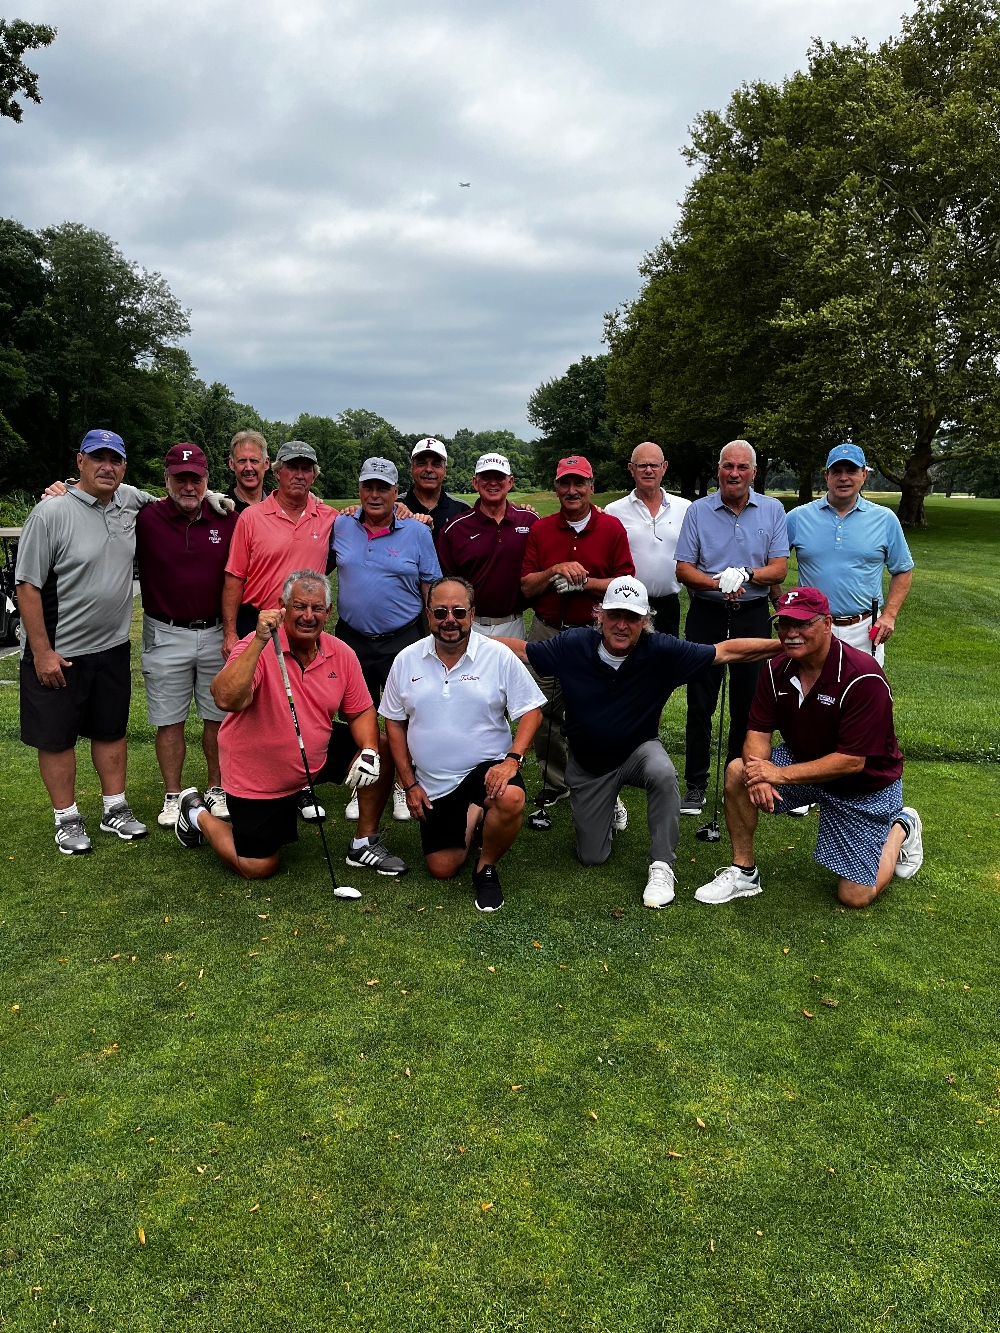 Members of the 1978 Fordham championship baseball team travelled from across the country for a reunion at the Froggy Open on August 7. 